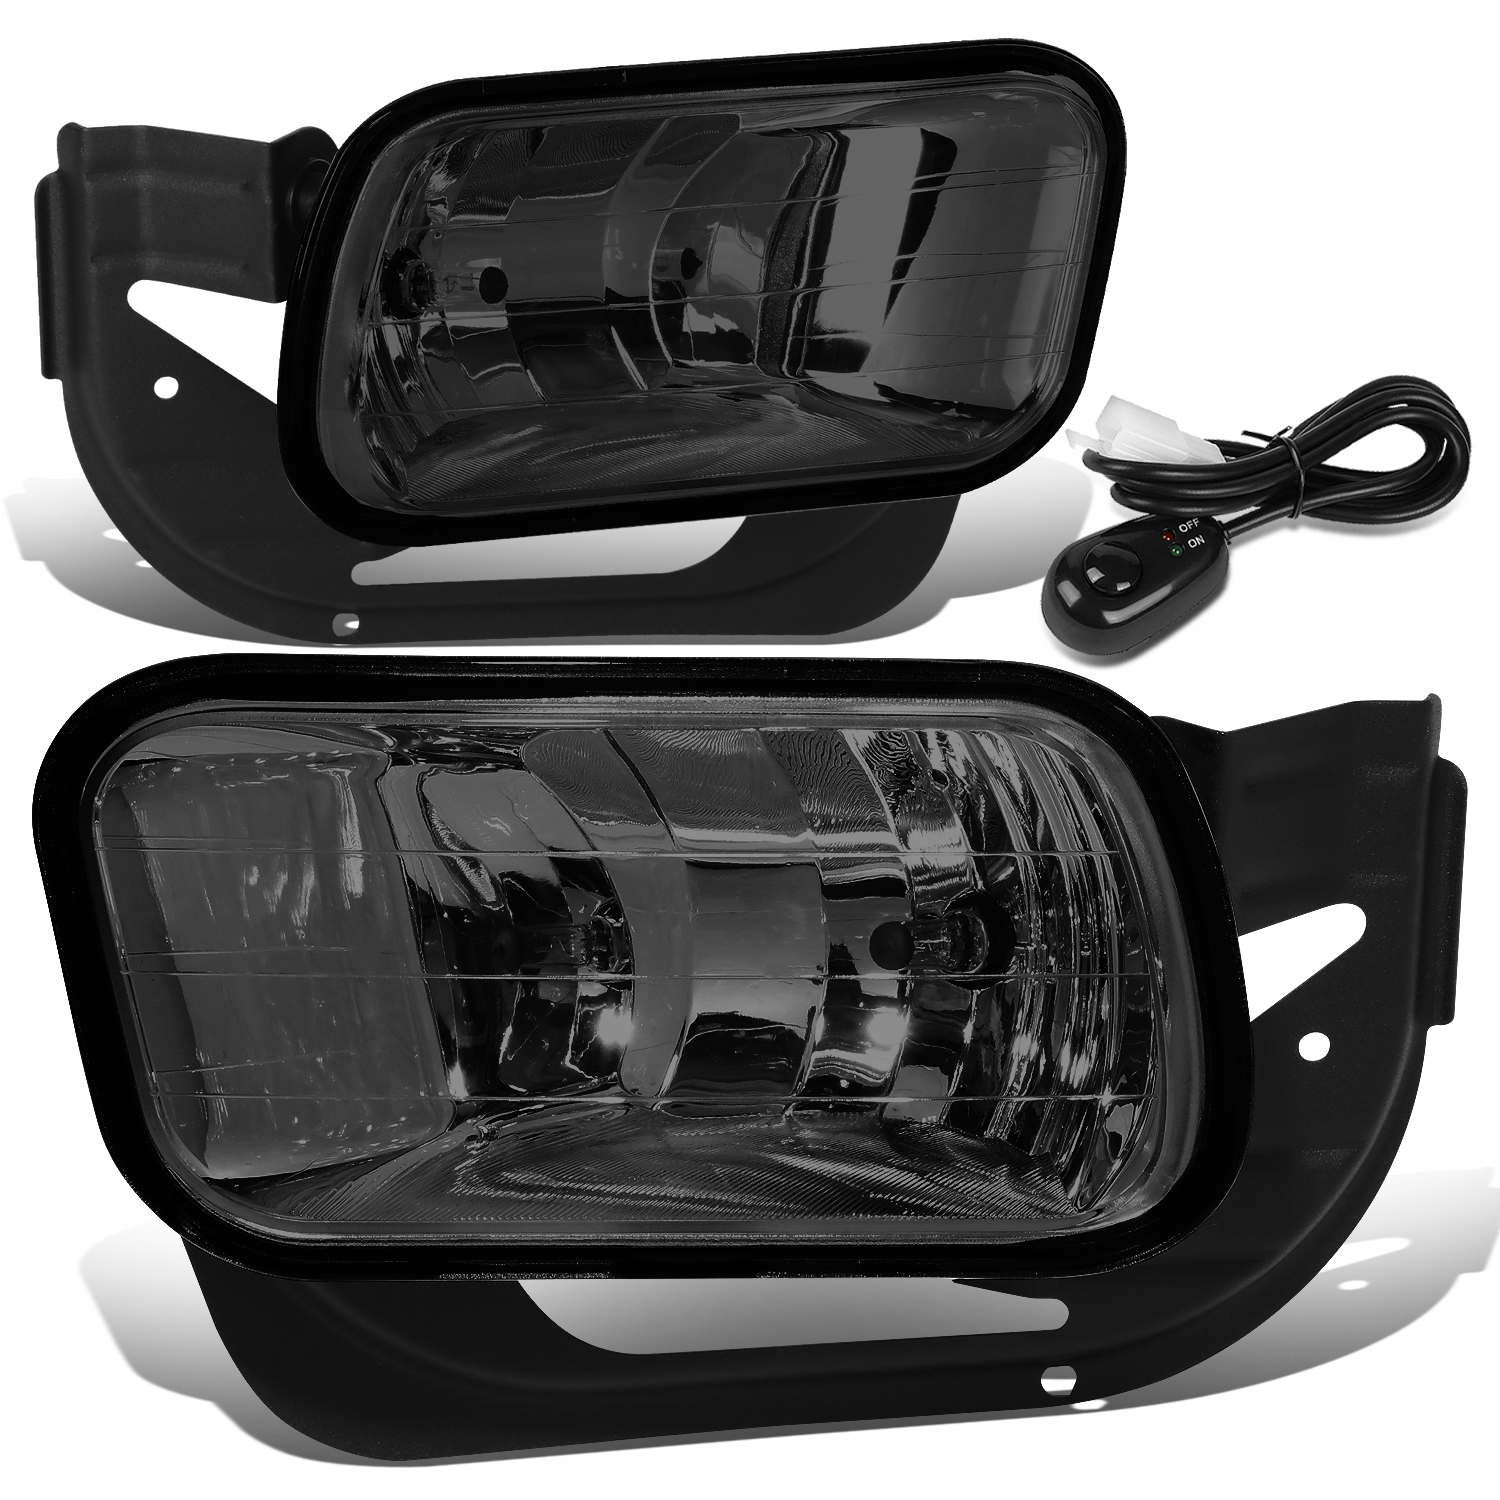 DNA Motoring For 2009 to 2018 Dodge Ram 1500 2500 3500 Pair Factory Style Smoked Lens Driving Fog Lights w/ Switch 10 11 12 13 14 15 16 17